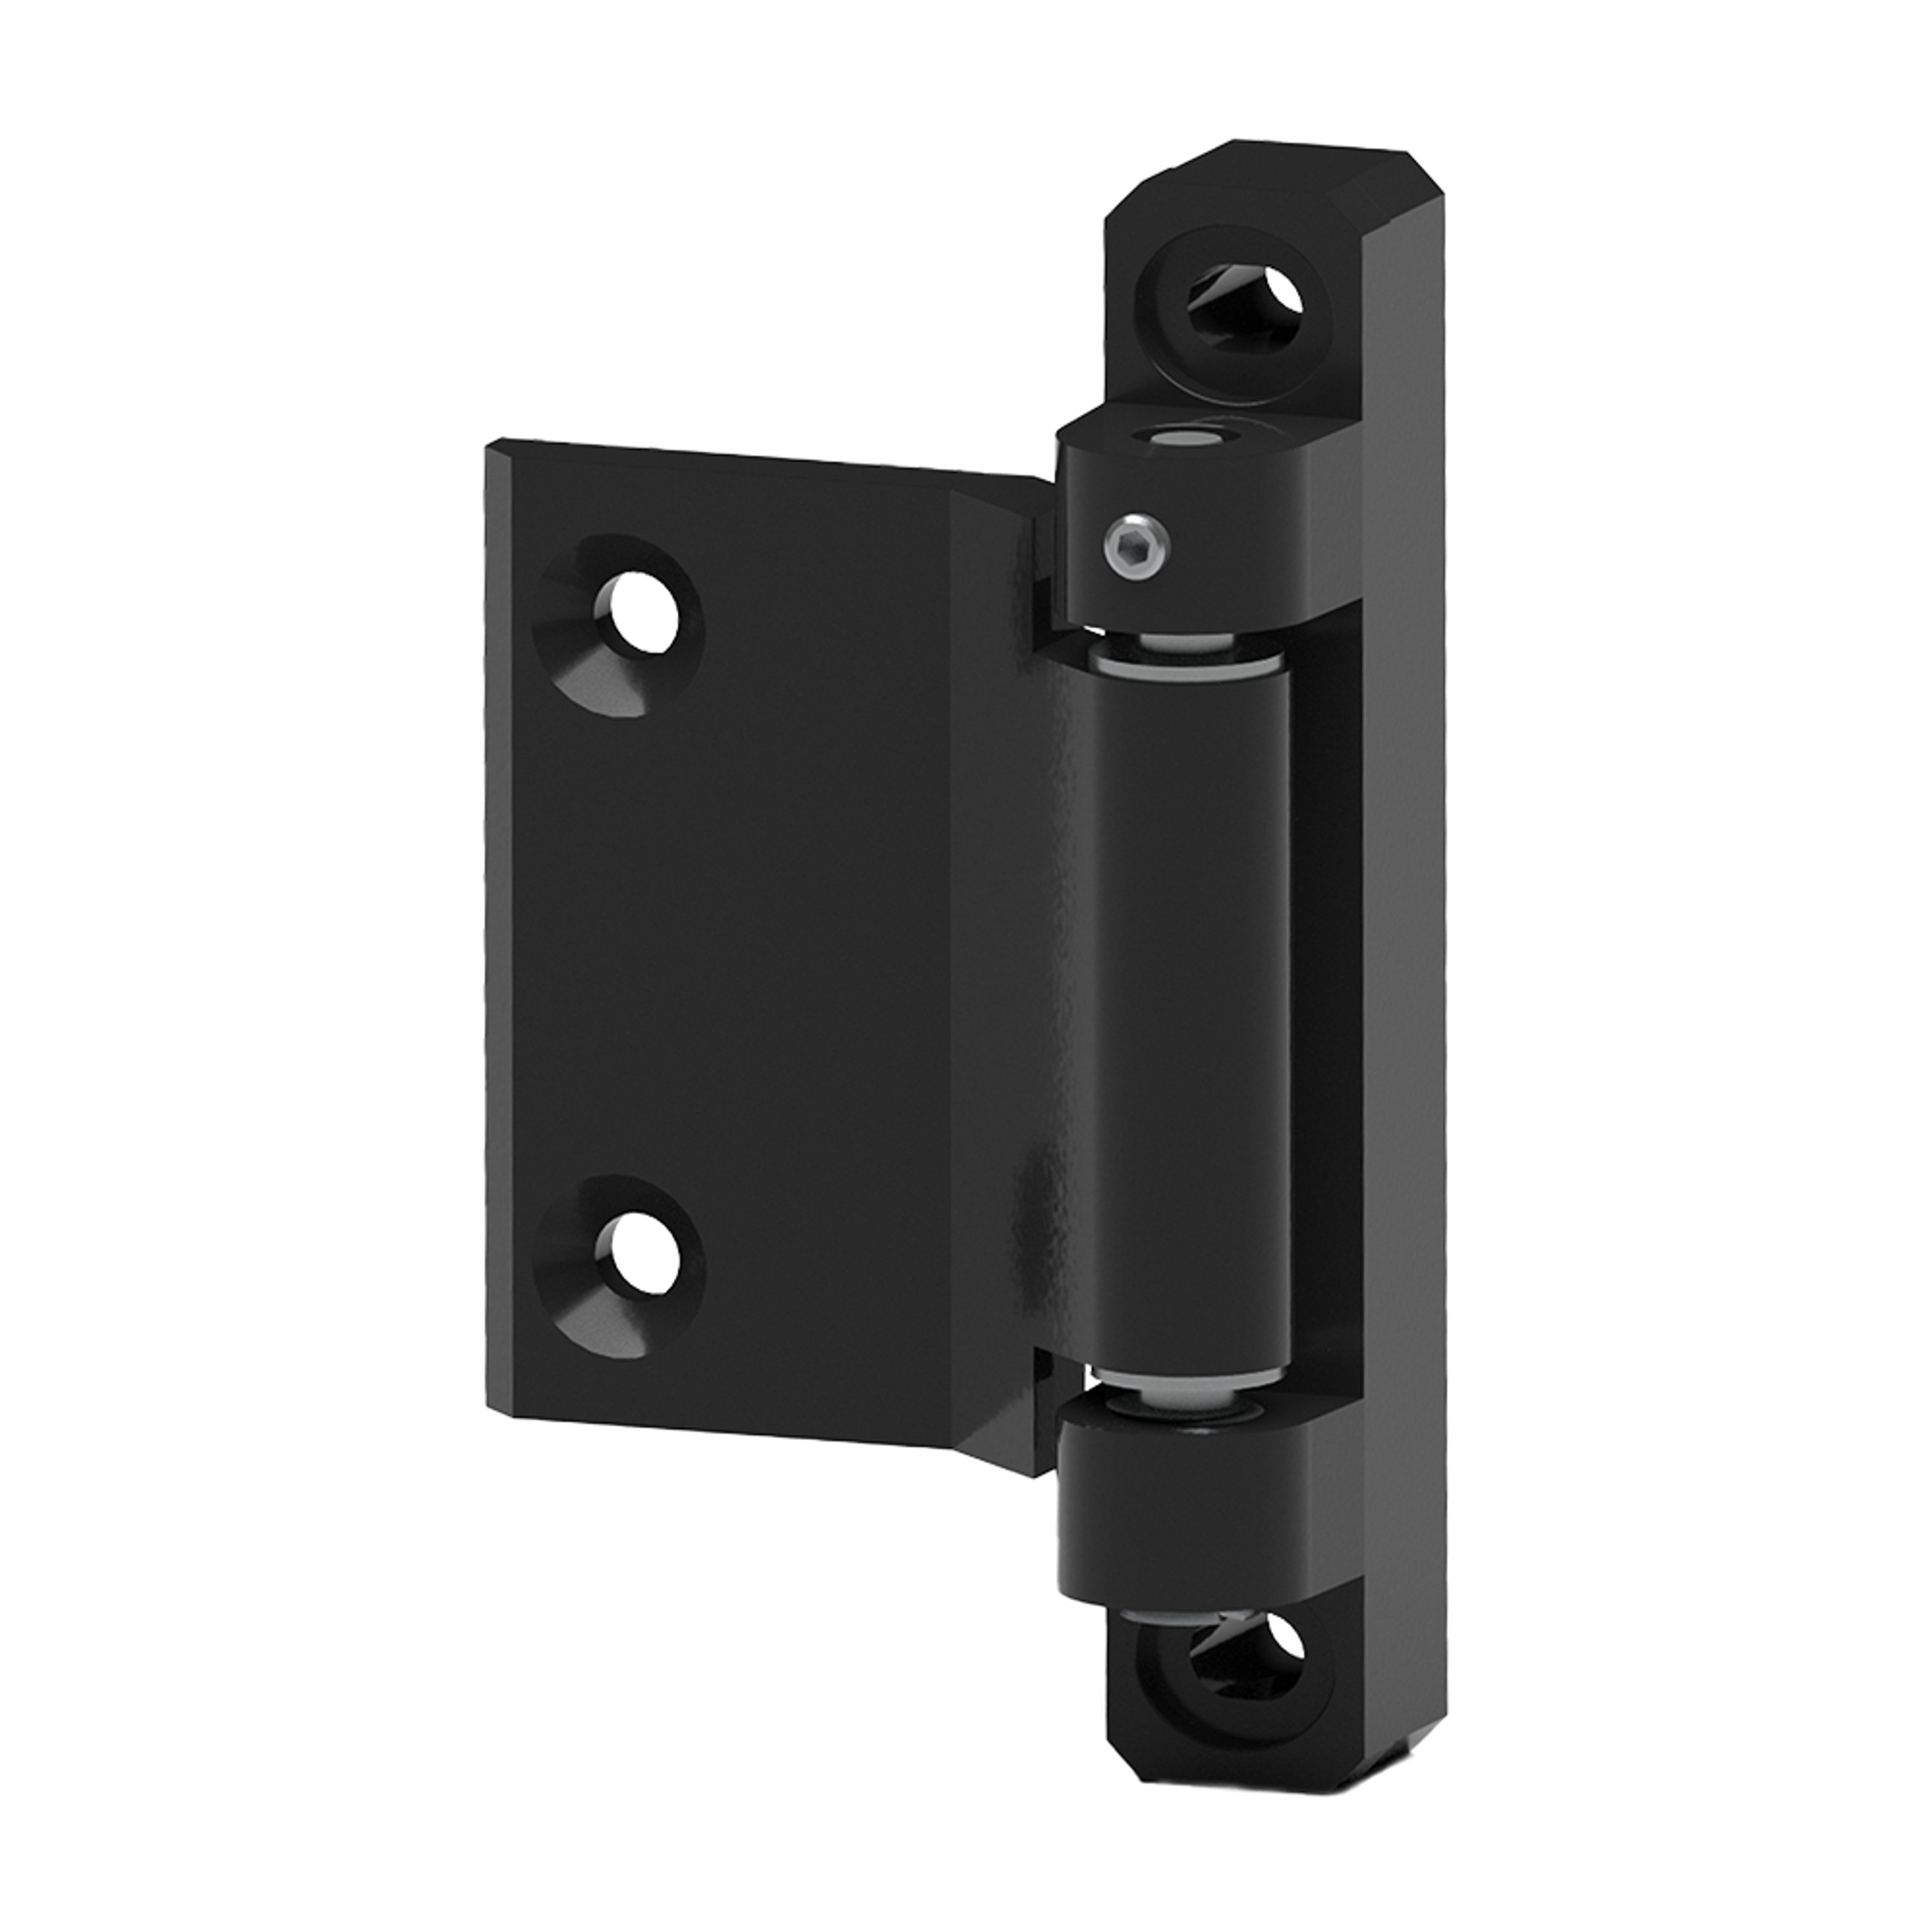 MA0007 - B02.A02 - Y-Axis Adjustable Zamak Hinge with Base (Right & Left)